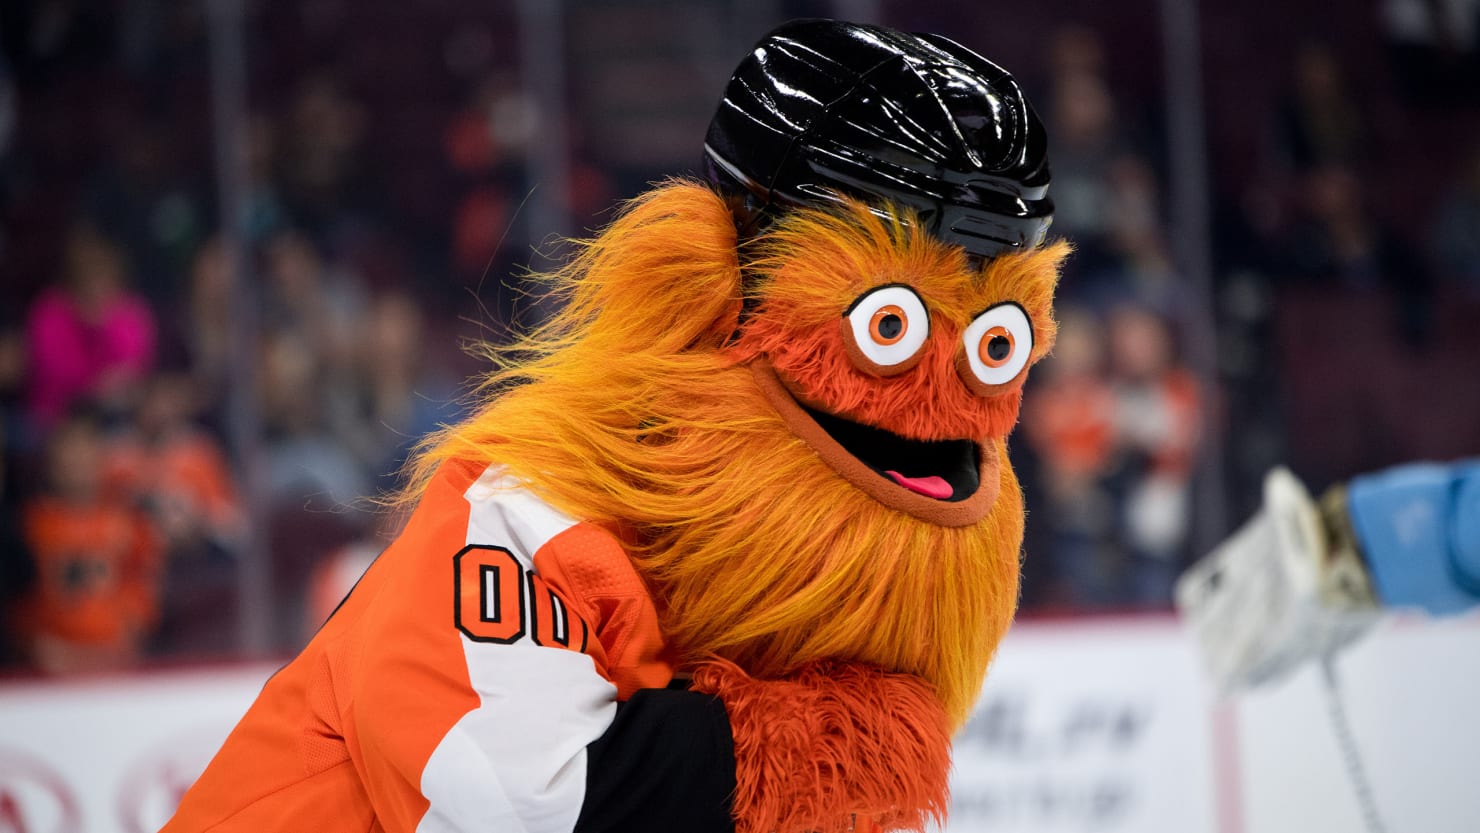 How much would it cost to get Gritty (or another Philly mascot) to